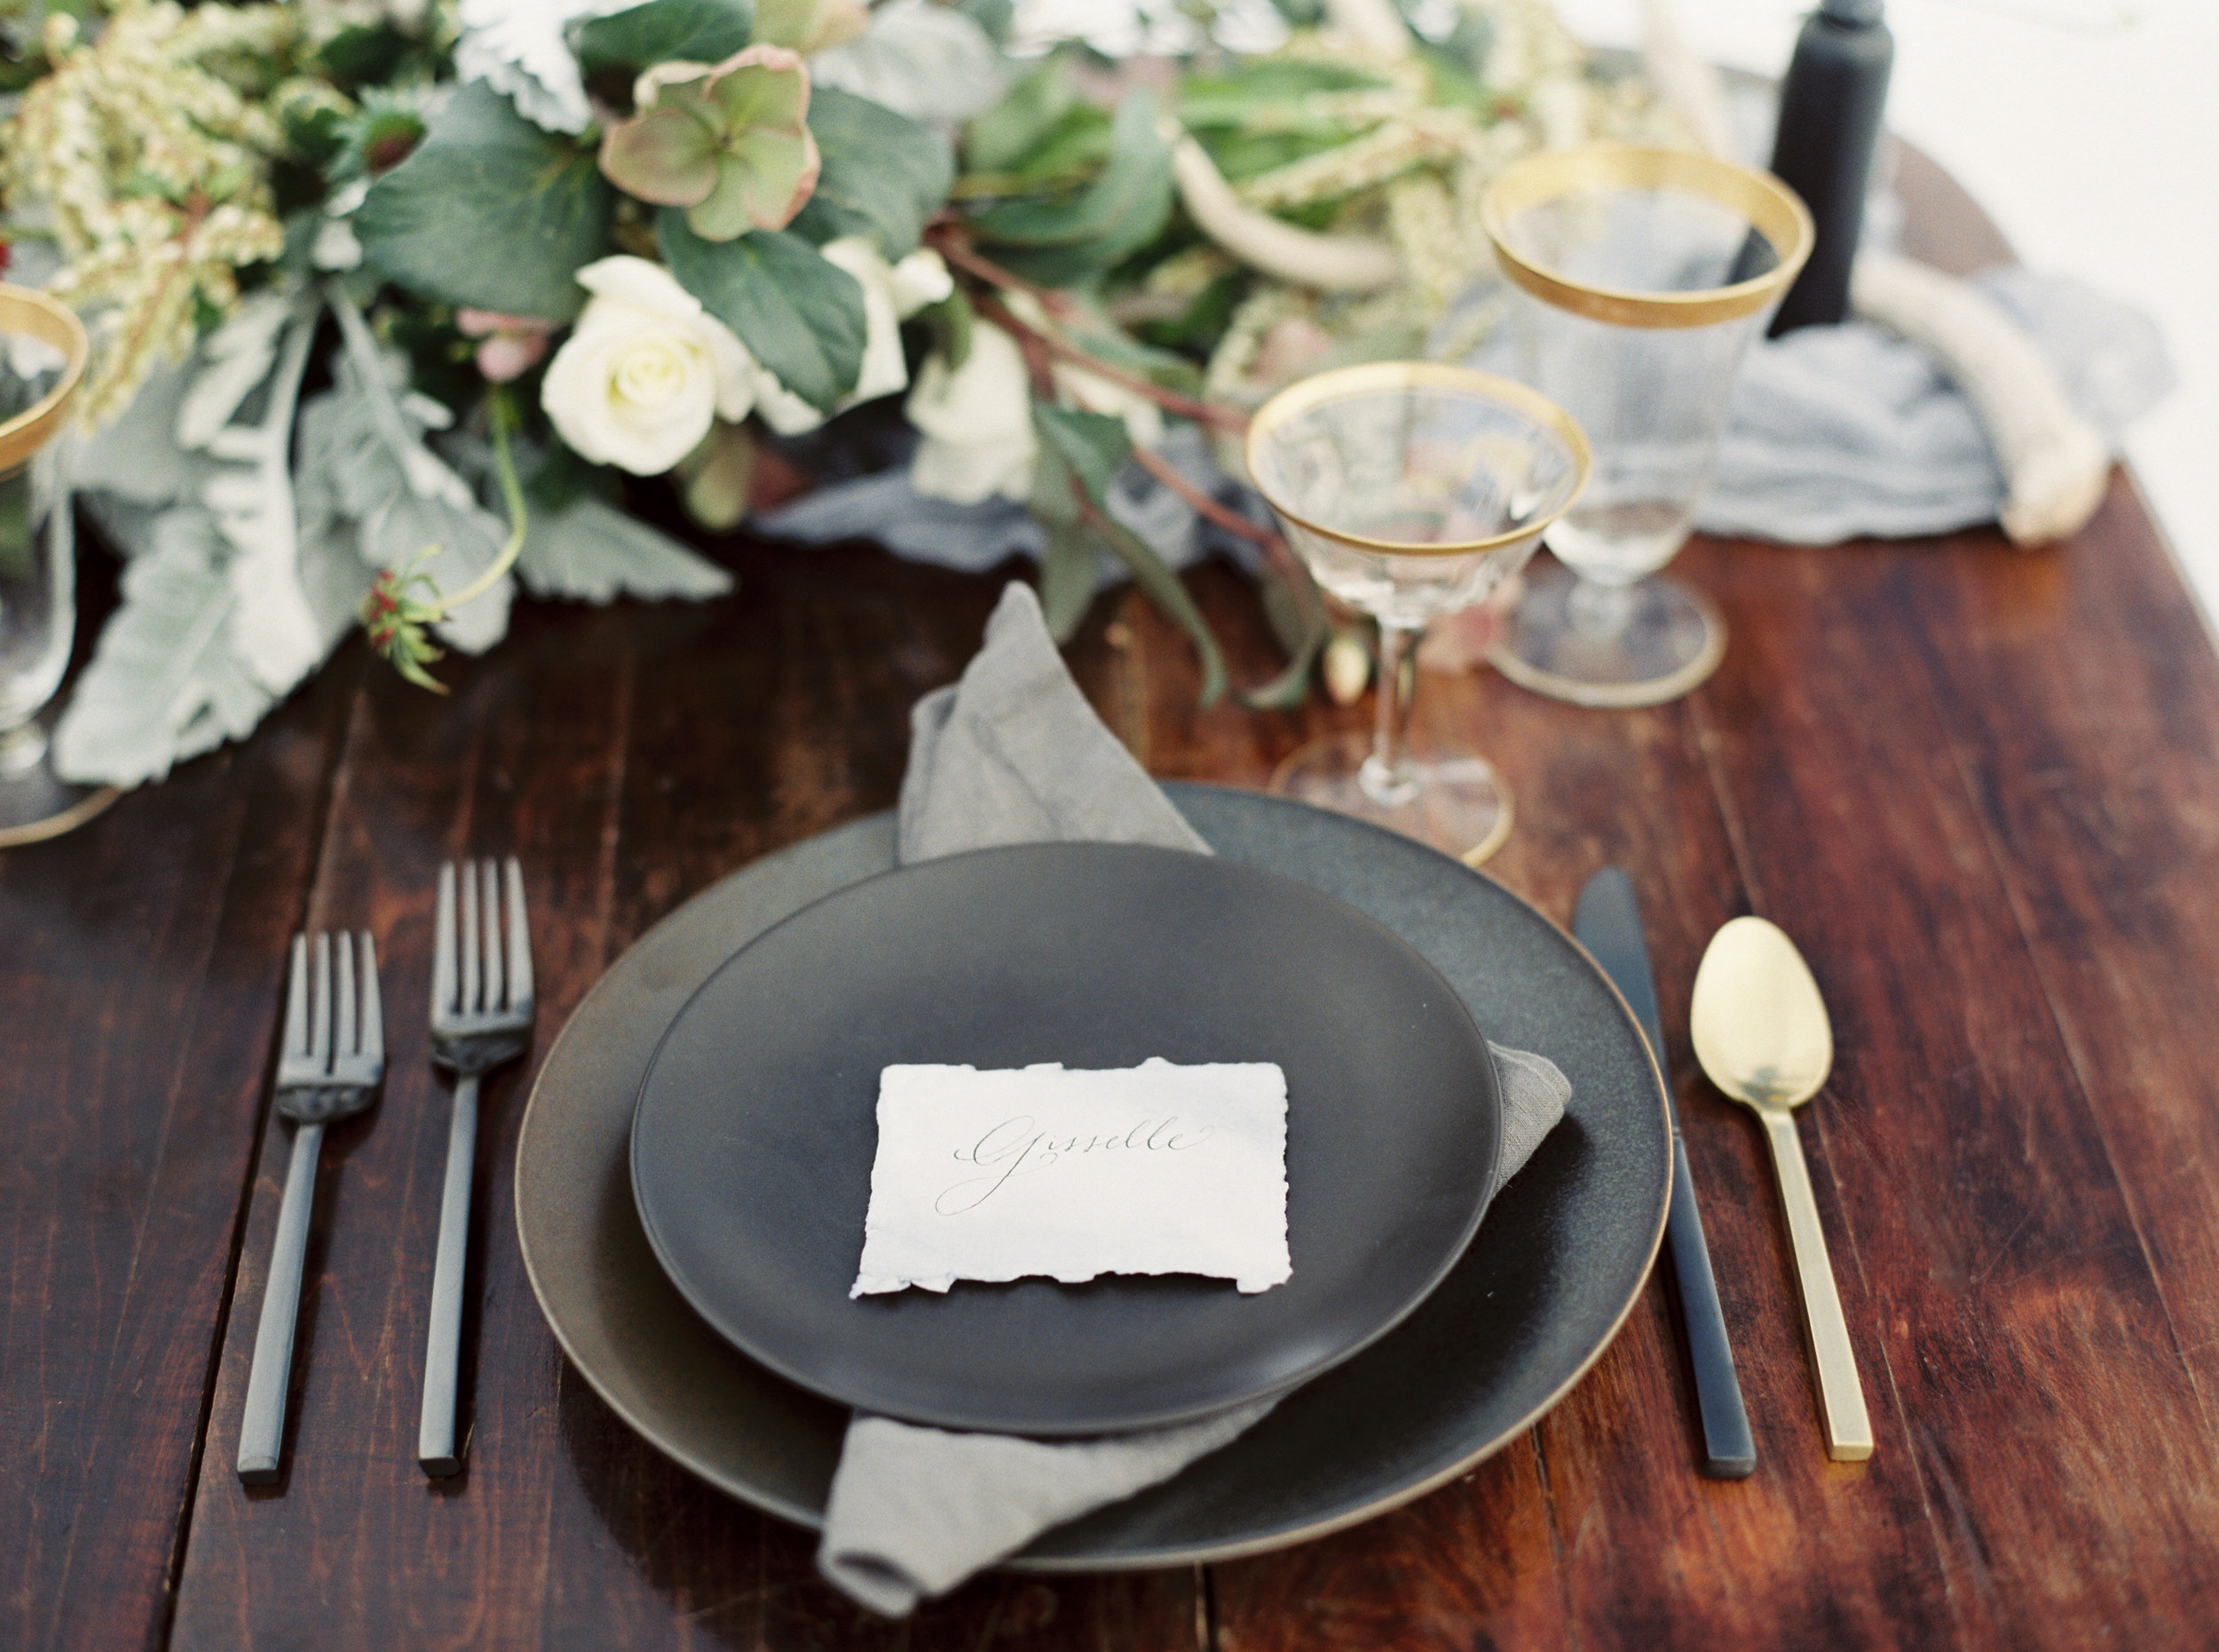 Paper Goods & Calligraphy: Spurlé Gul Studio | Photography: Simply Sarah Photography | Planning & Styling: Bash Bozeman